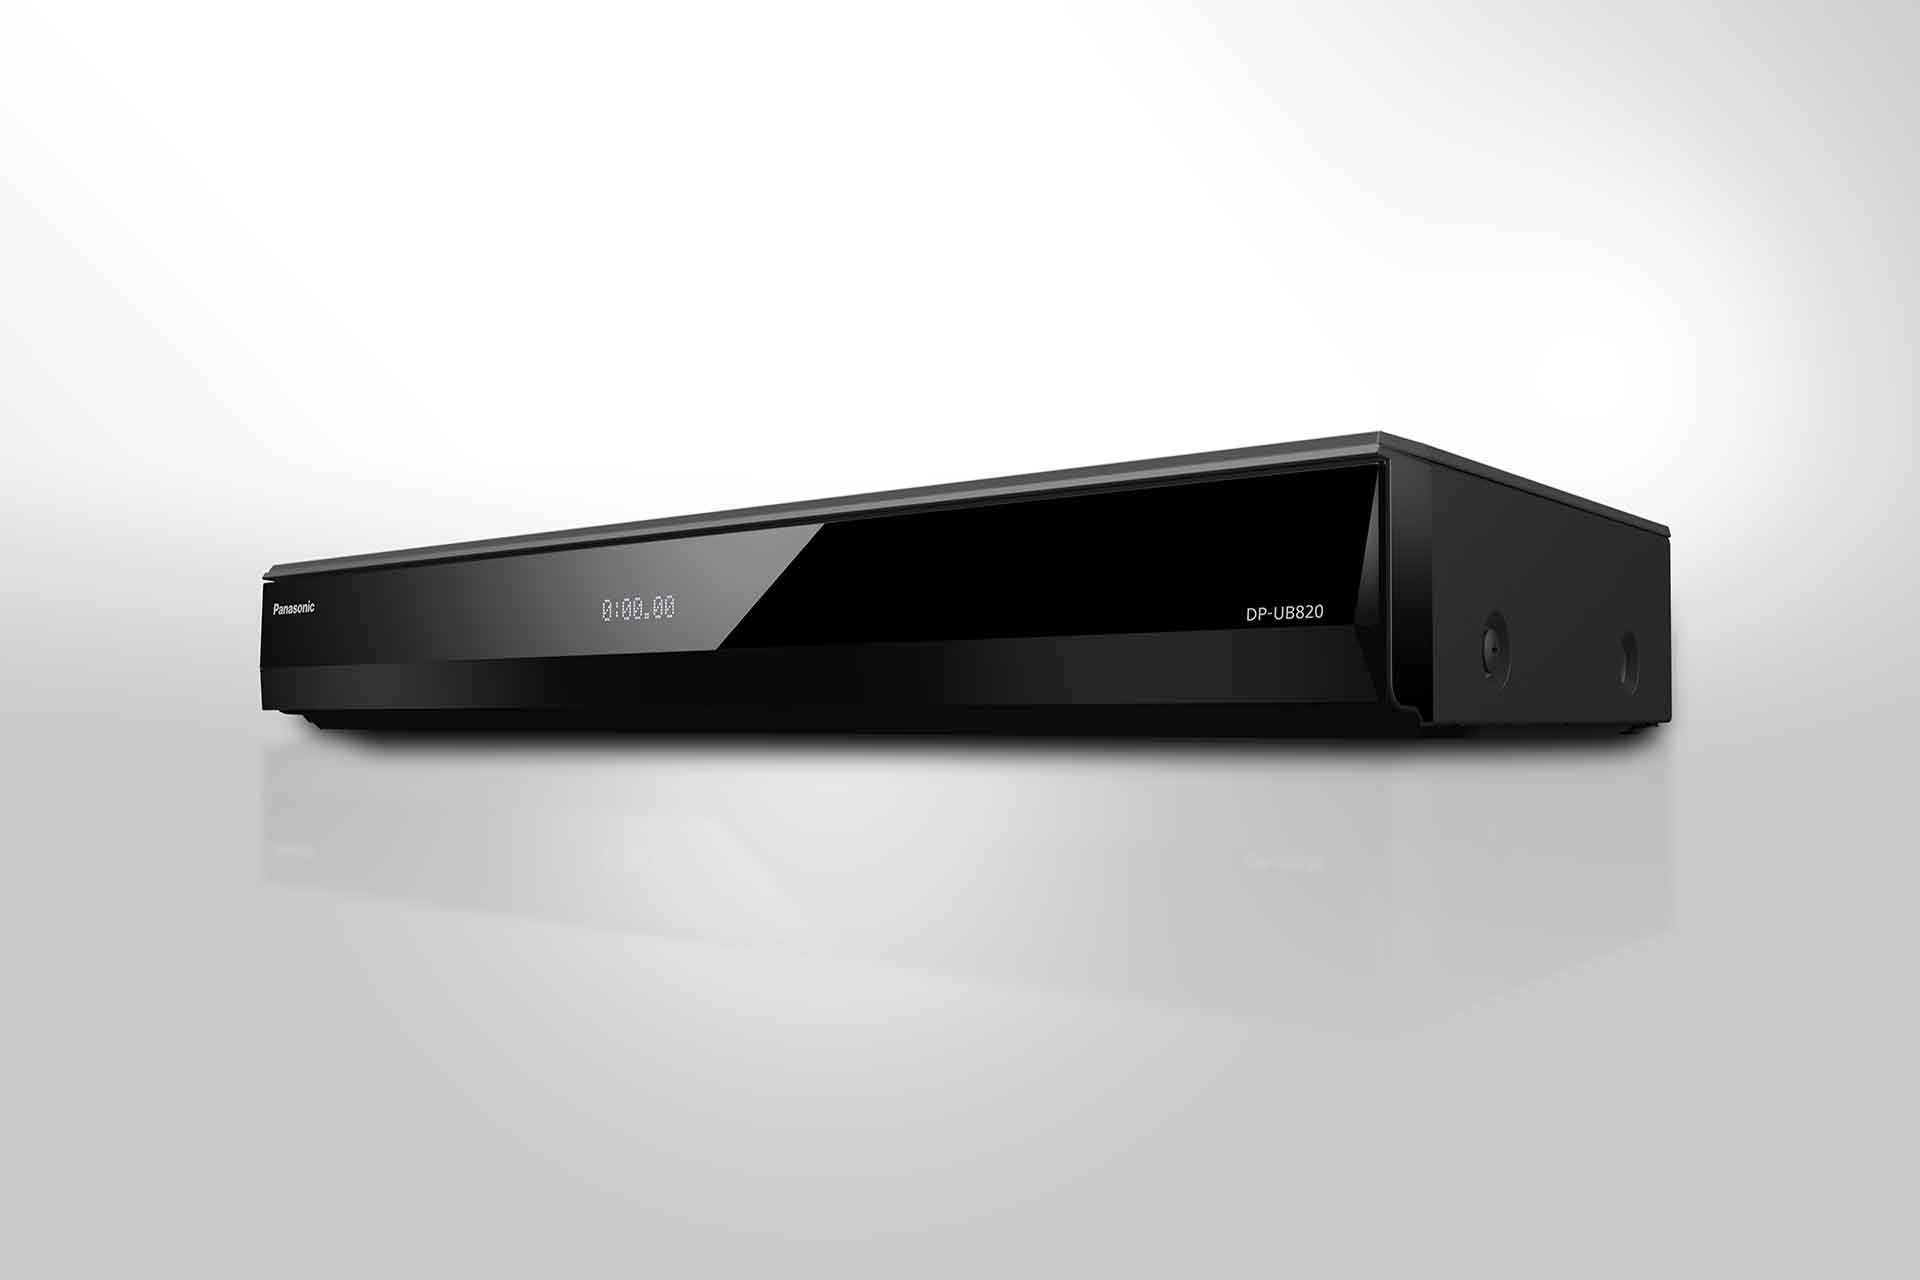 Panasonic Streaming 4K Blu Ray Player with Dolby Vision and HDR10+ Ultra HD  Premium Video Playback, Hi-Res Audio, Voice Assist - DP-UB820-K (Black)